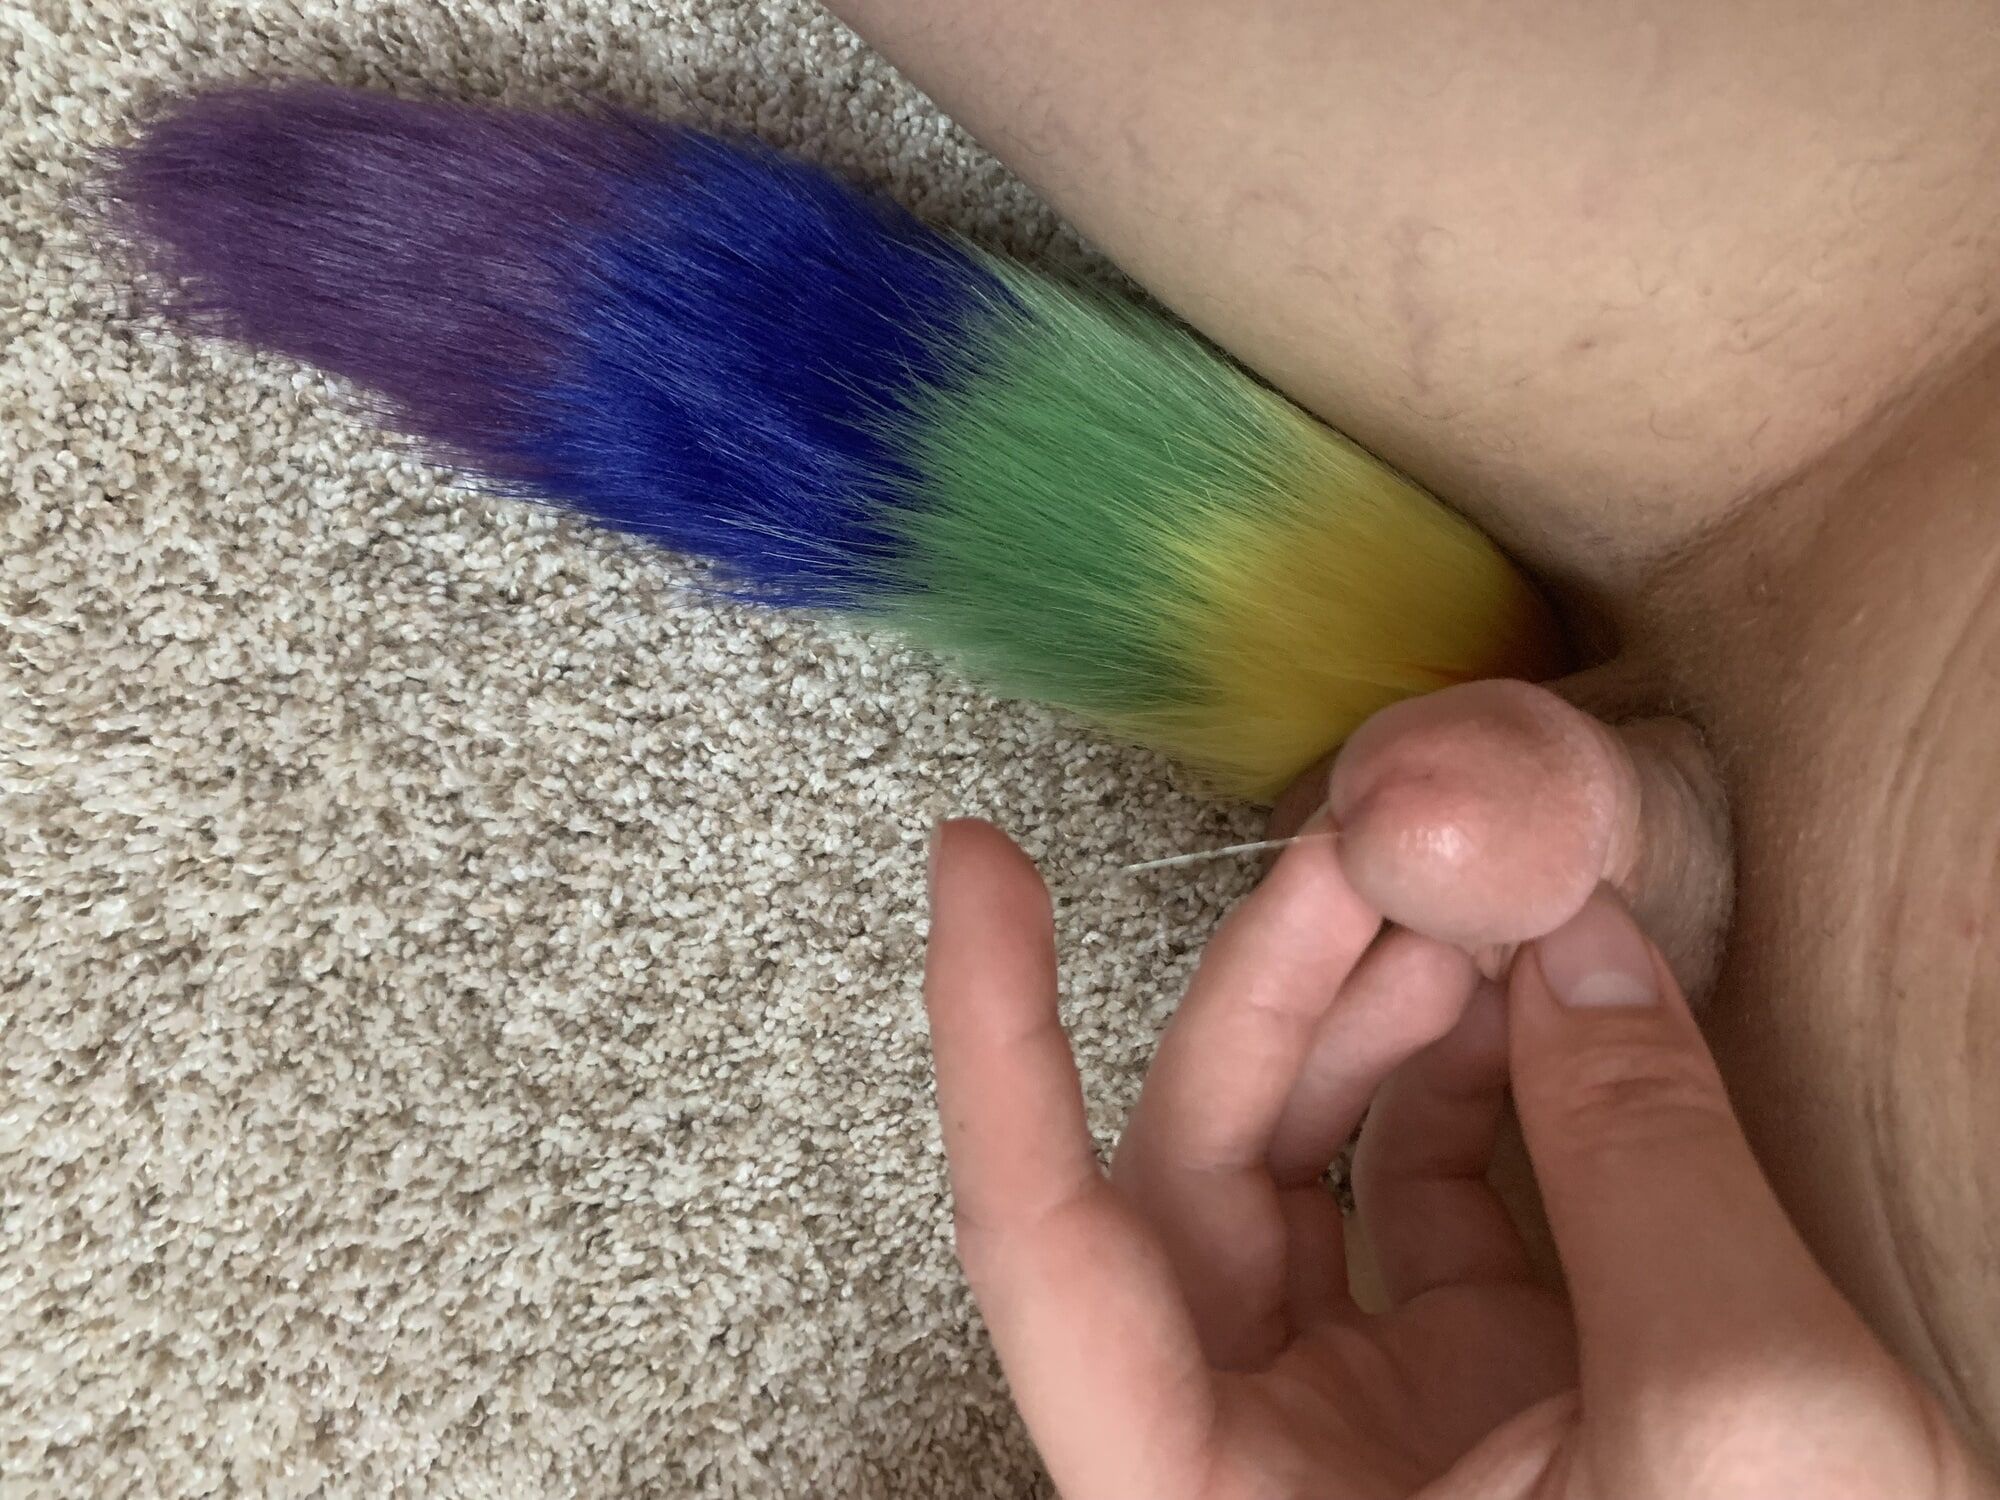 My new buttplug tail #9